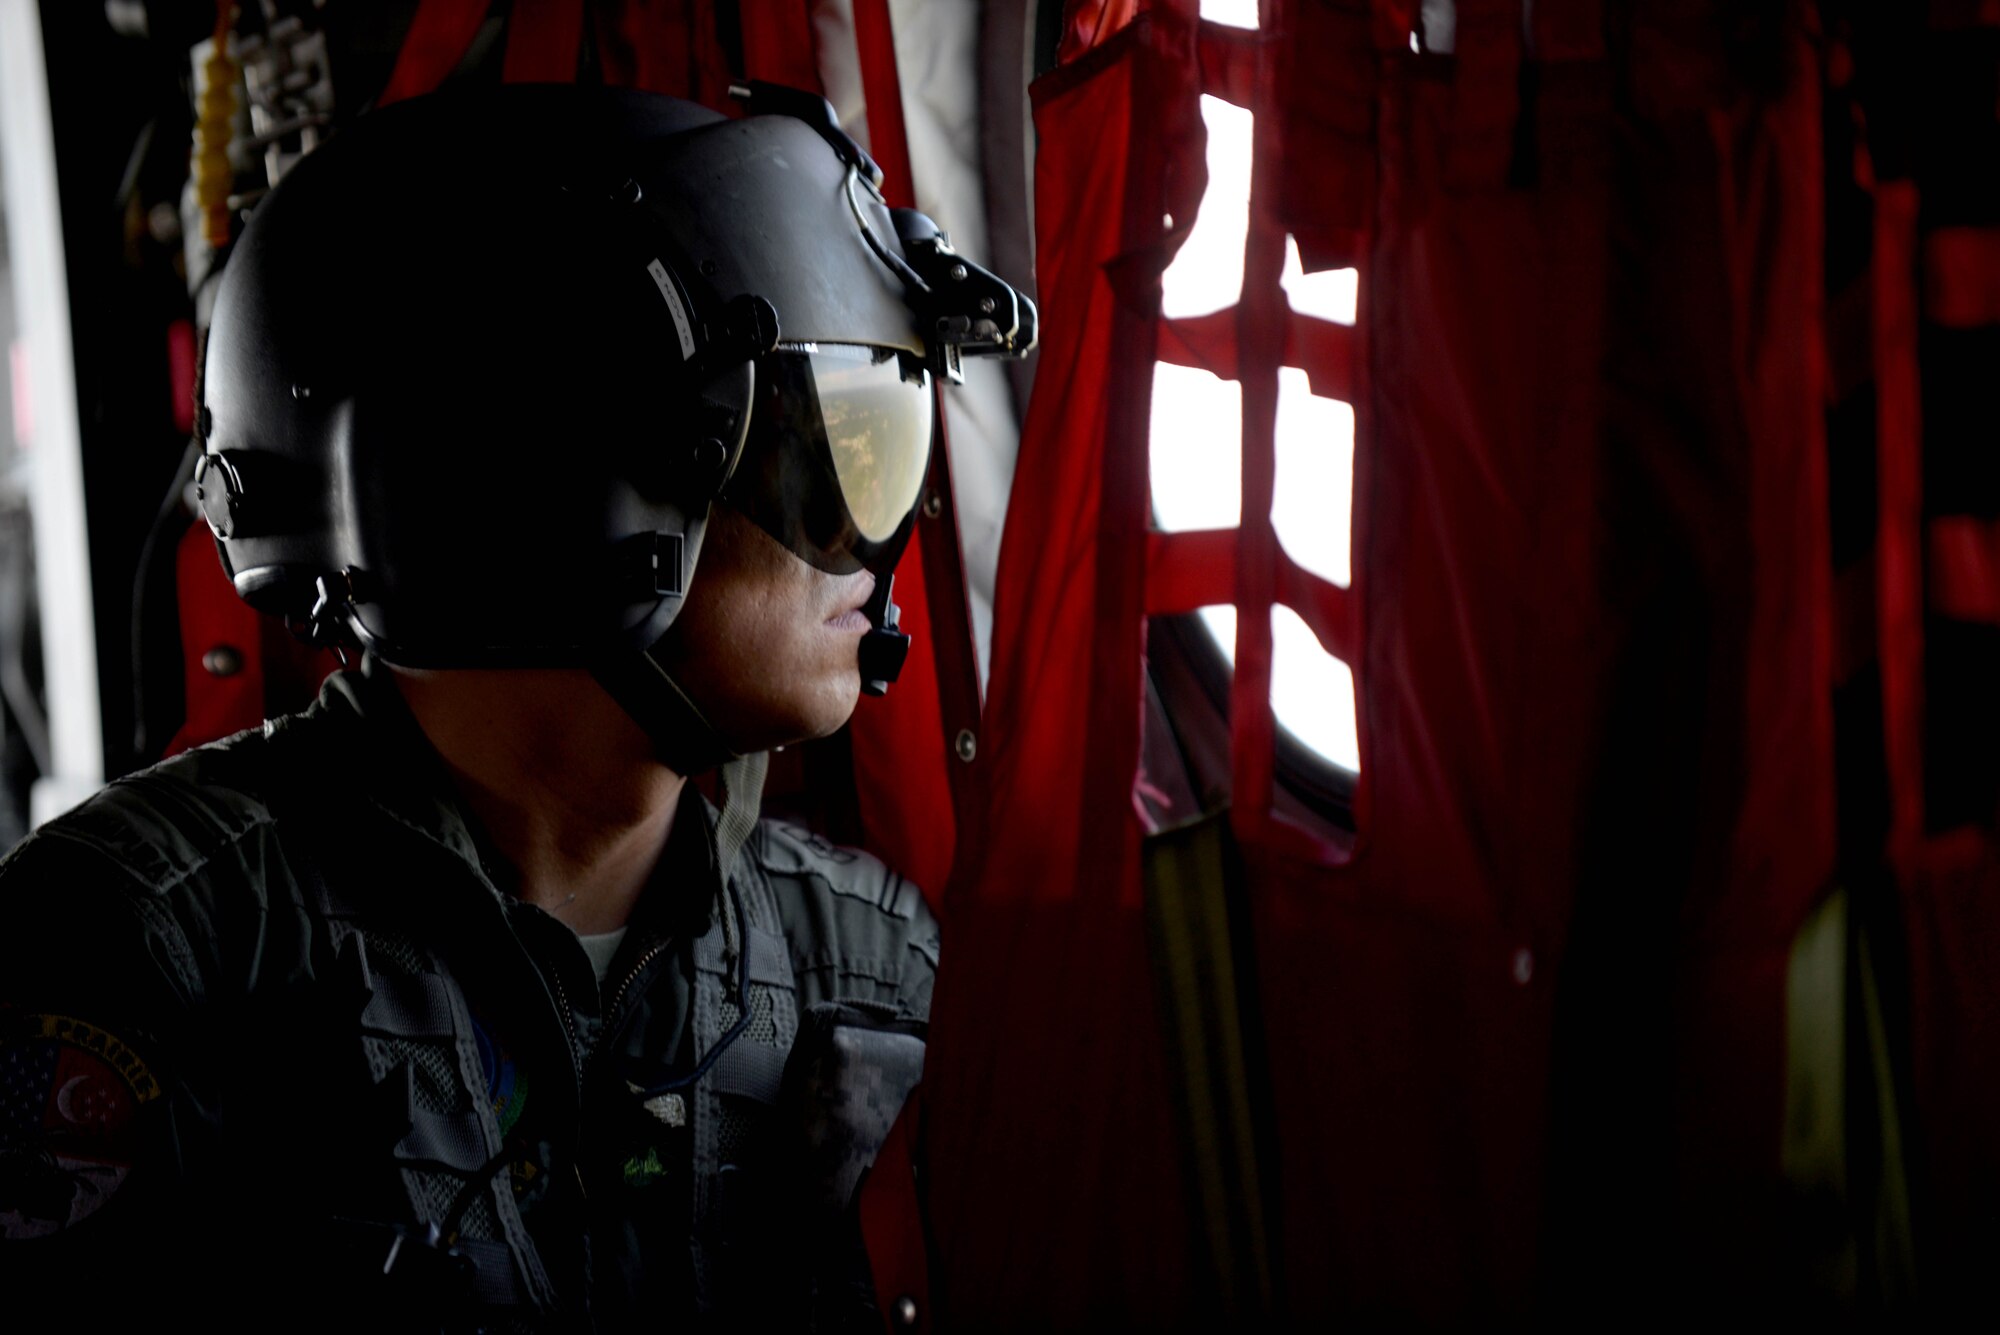 A Republic of Singapore Air Force aircrew member participates in Survival, Evasion, Resistance and Escape training aboard a CH-47D Chinook near Fort Meade, S.D., June 21, 2016. The helicopter transported 14 personnel to an area near Fort Meade to simulate the steps to be taken when stranded in hostile territory. (U.S. Air Force photo by Senior Airman Rebecca Imwalle/Released) 